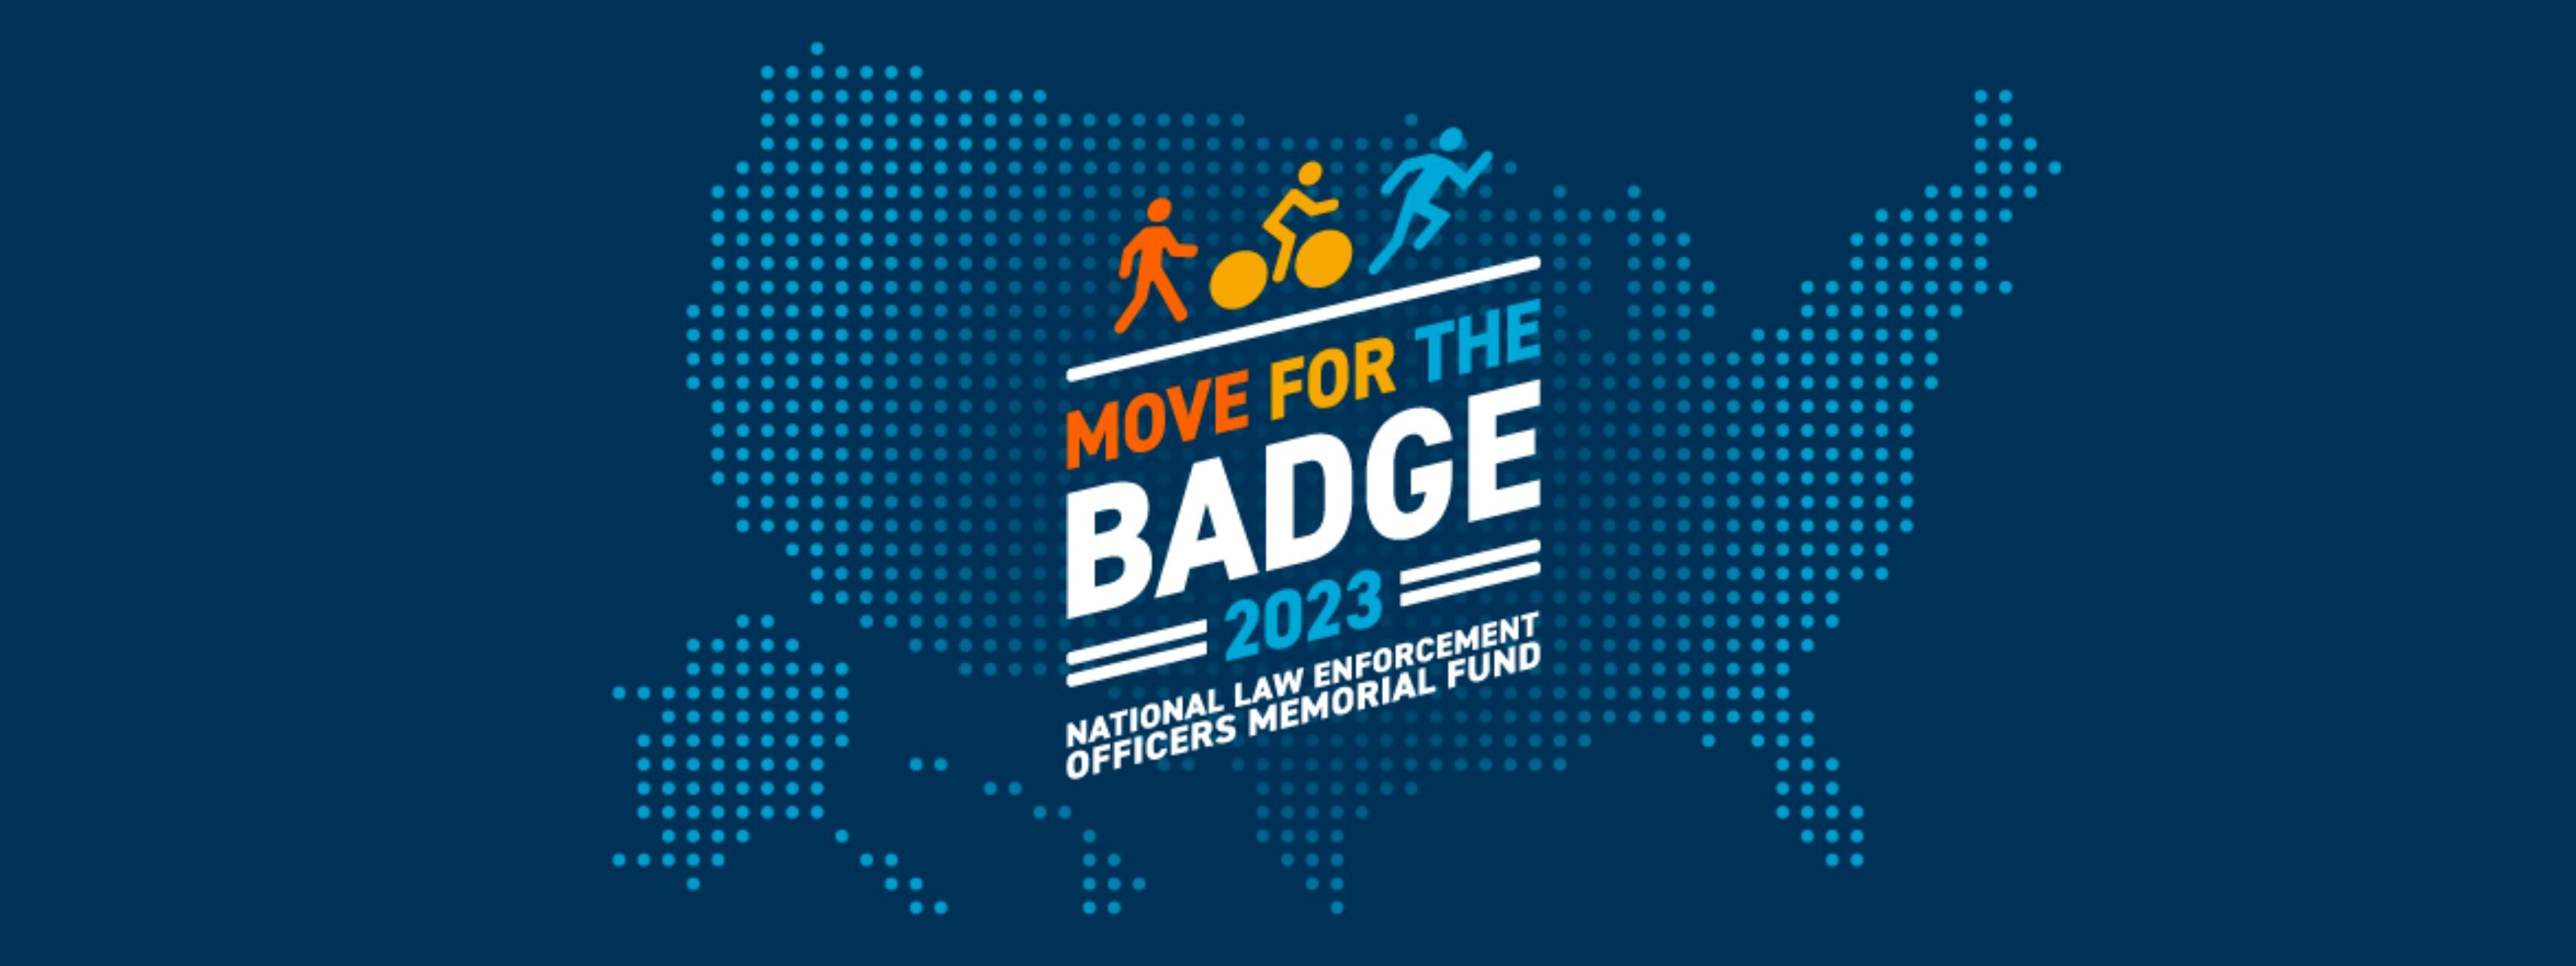 2023 Nationwide Move for the Badge